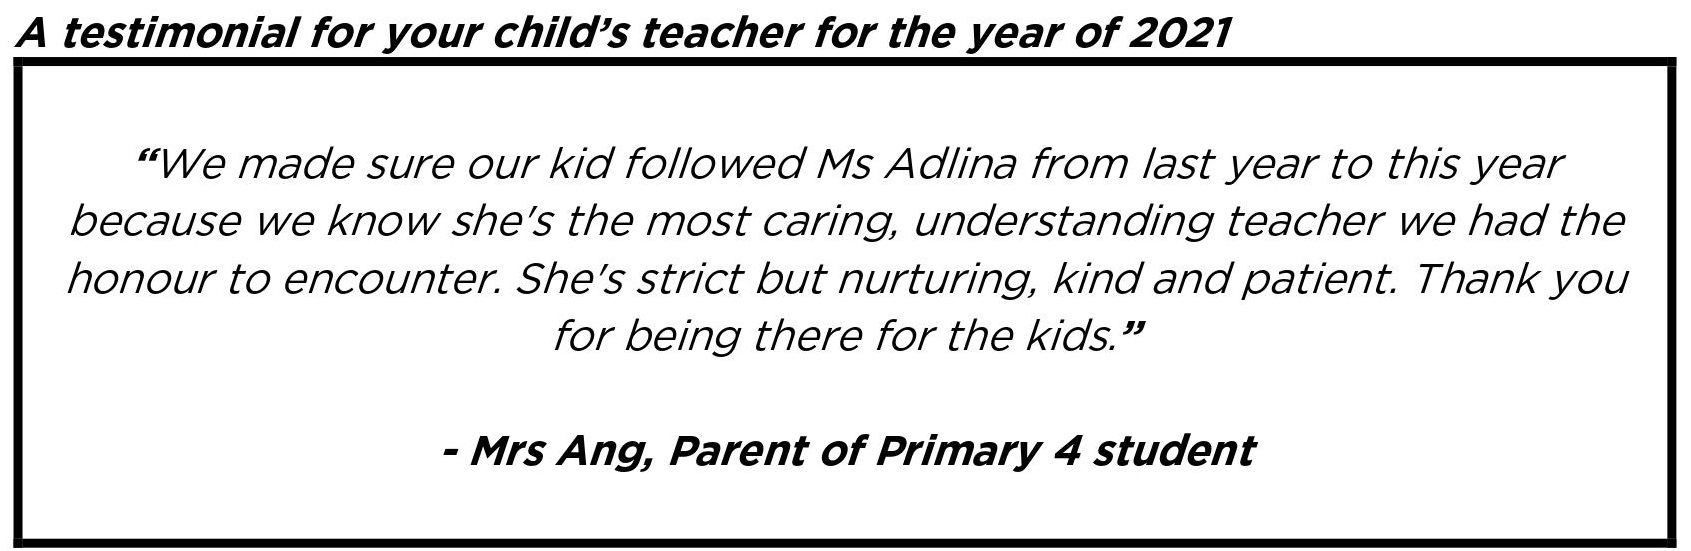 "...she's the most caring, understanding teacher we had the honour to encounter."